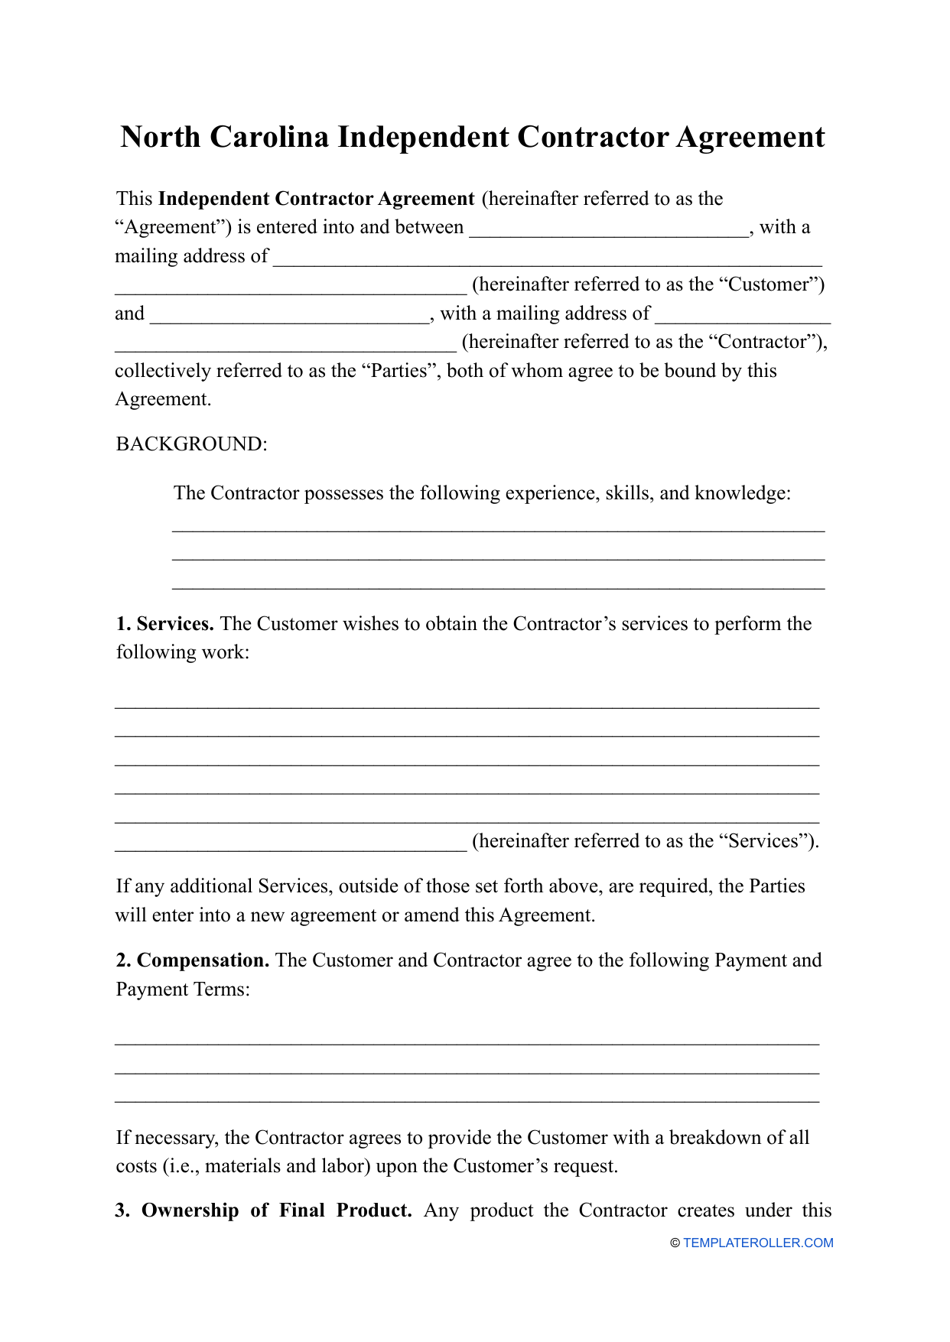 Independent Contractor Agreement Template - North Carolina, Page 1